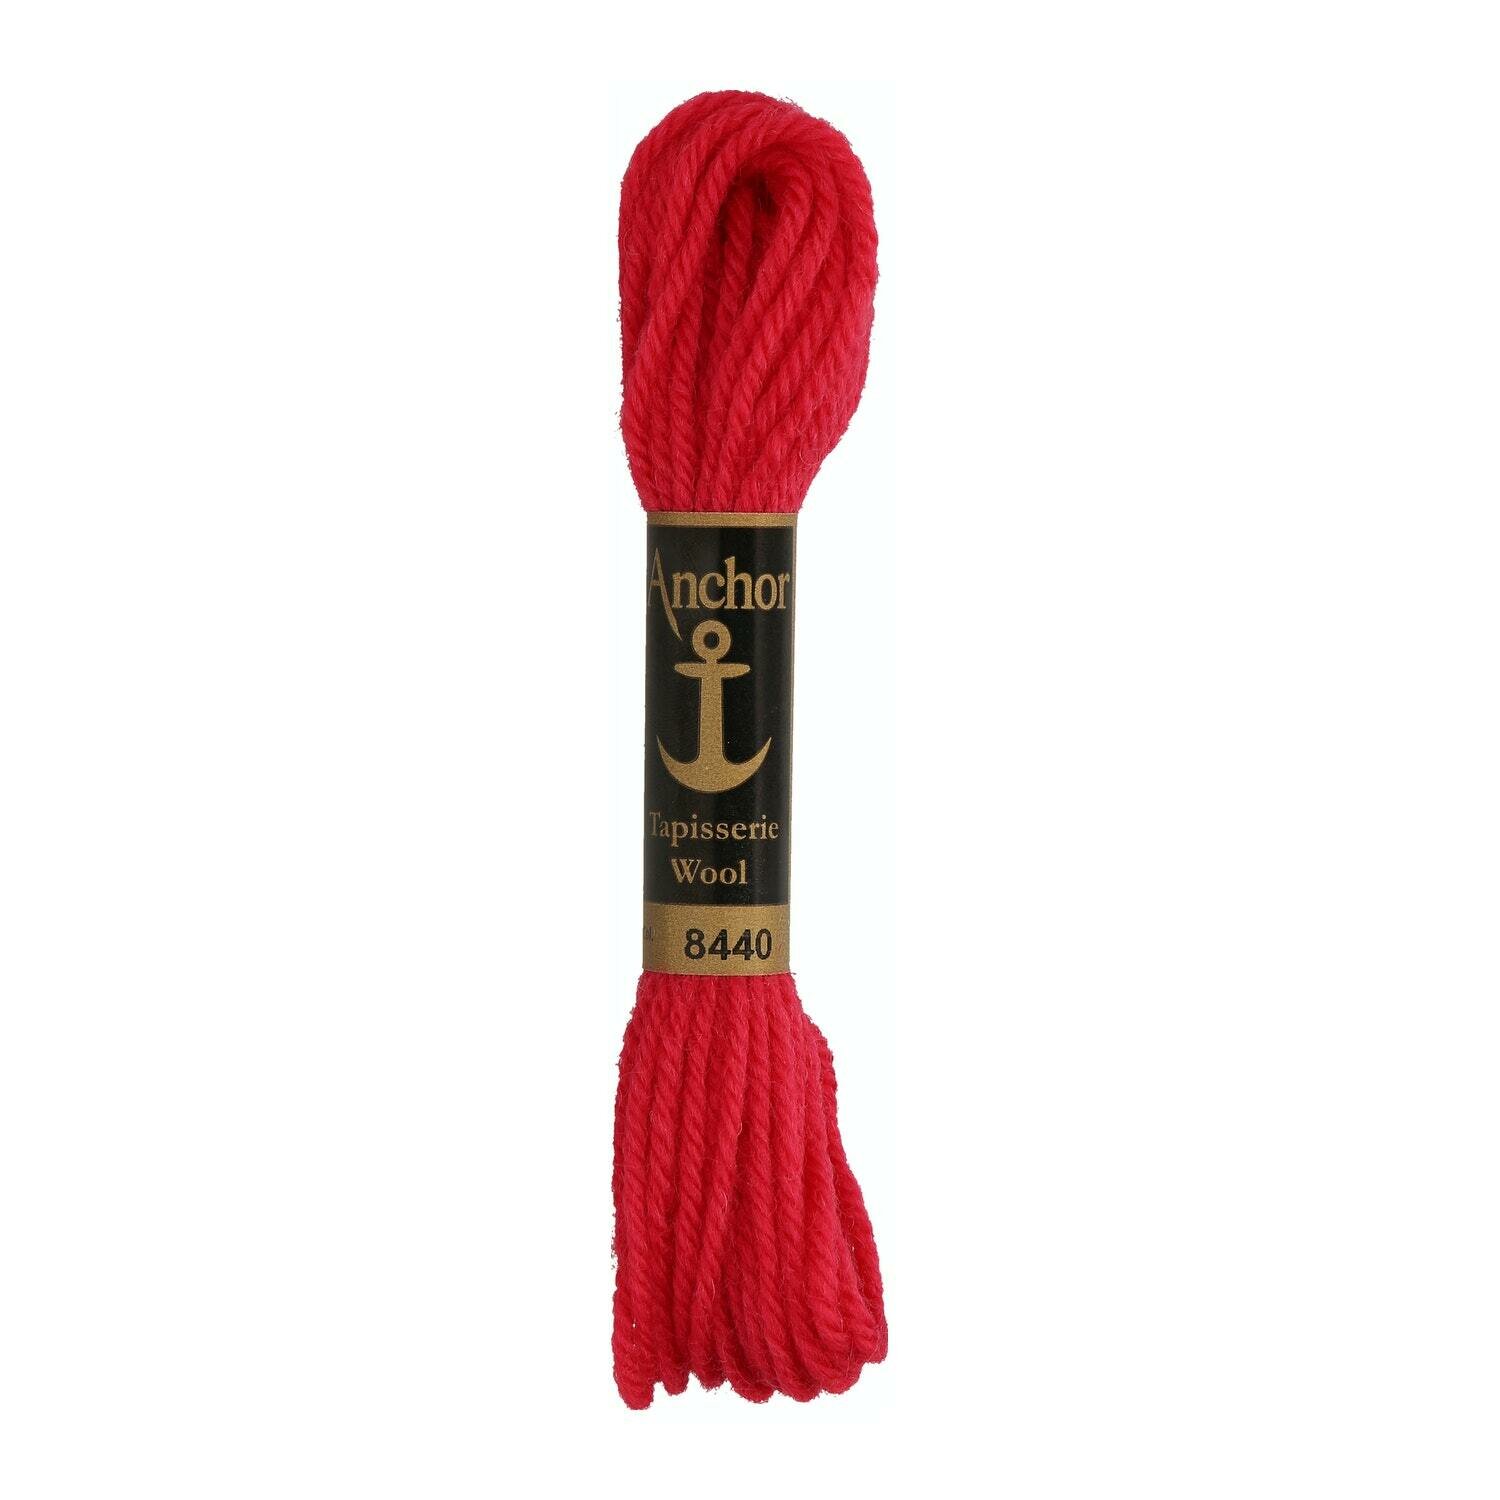 Anchor Tapisserie Wool #  08440